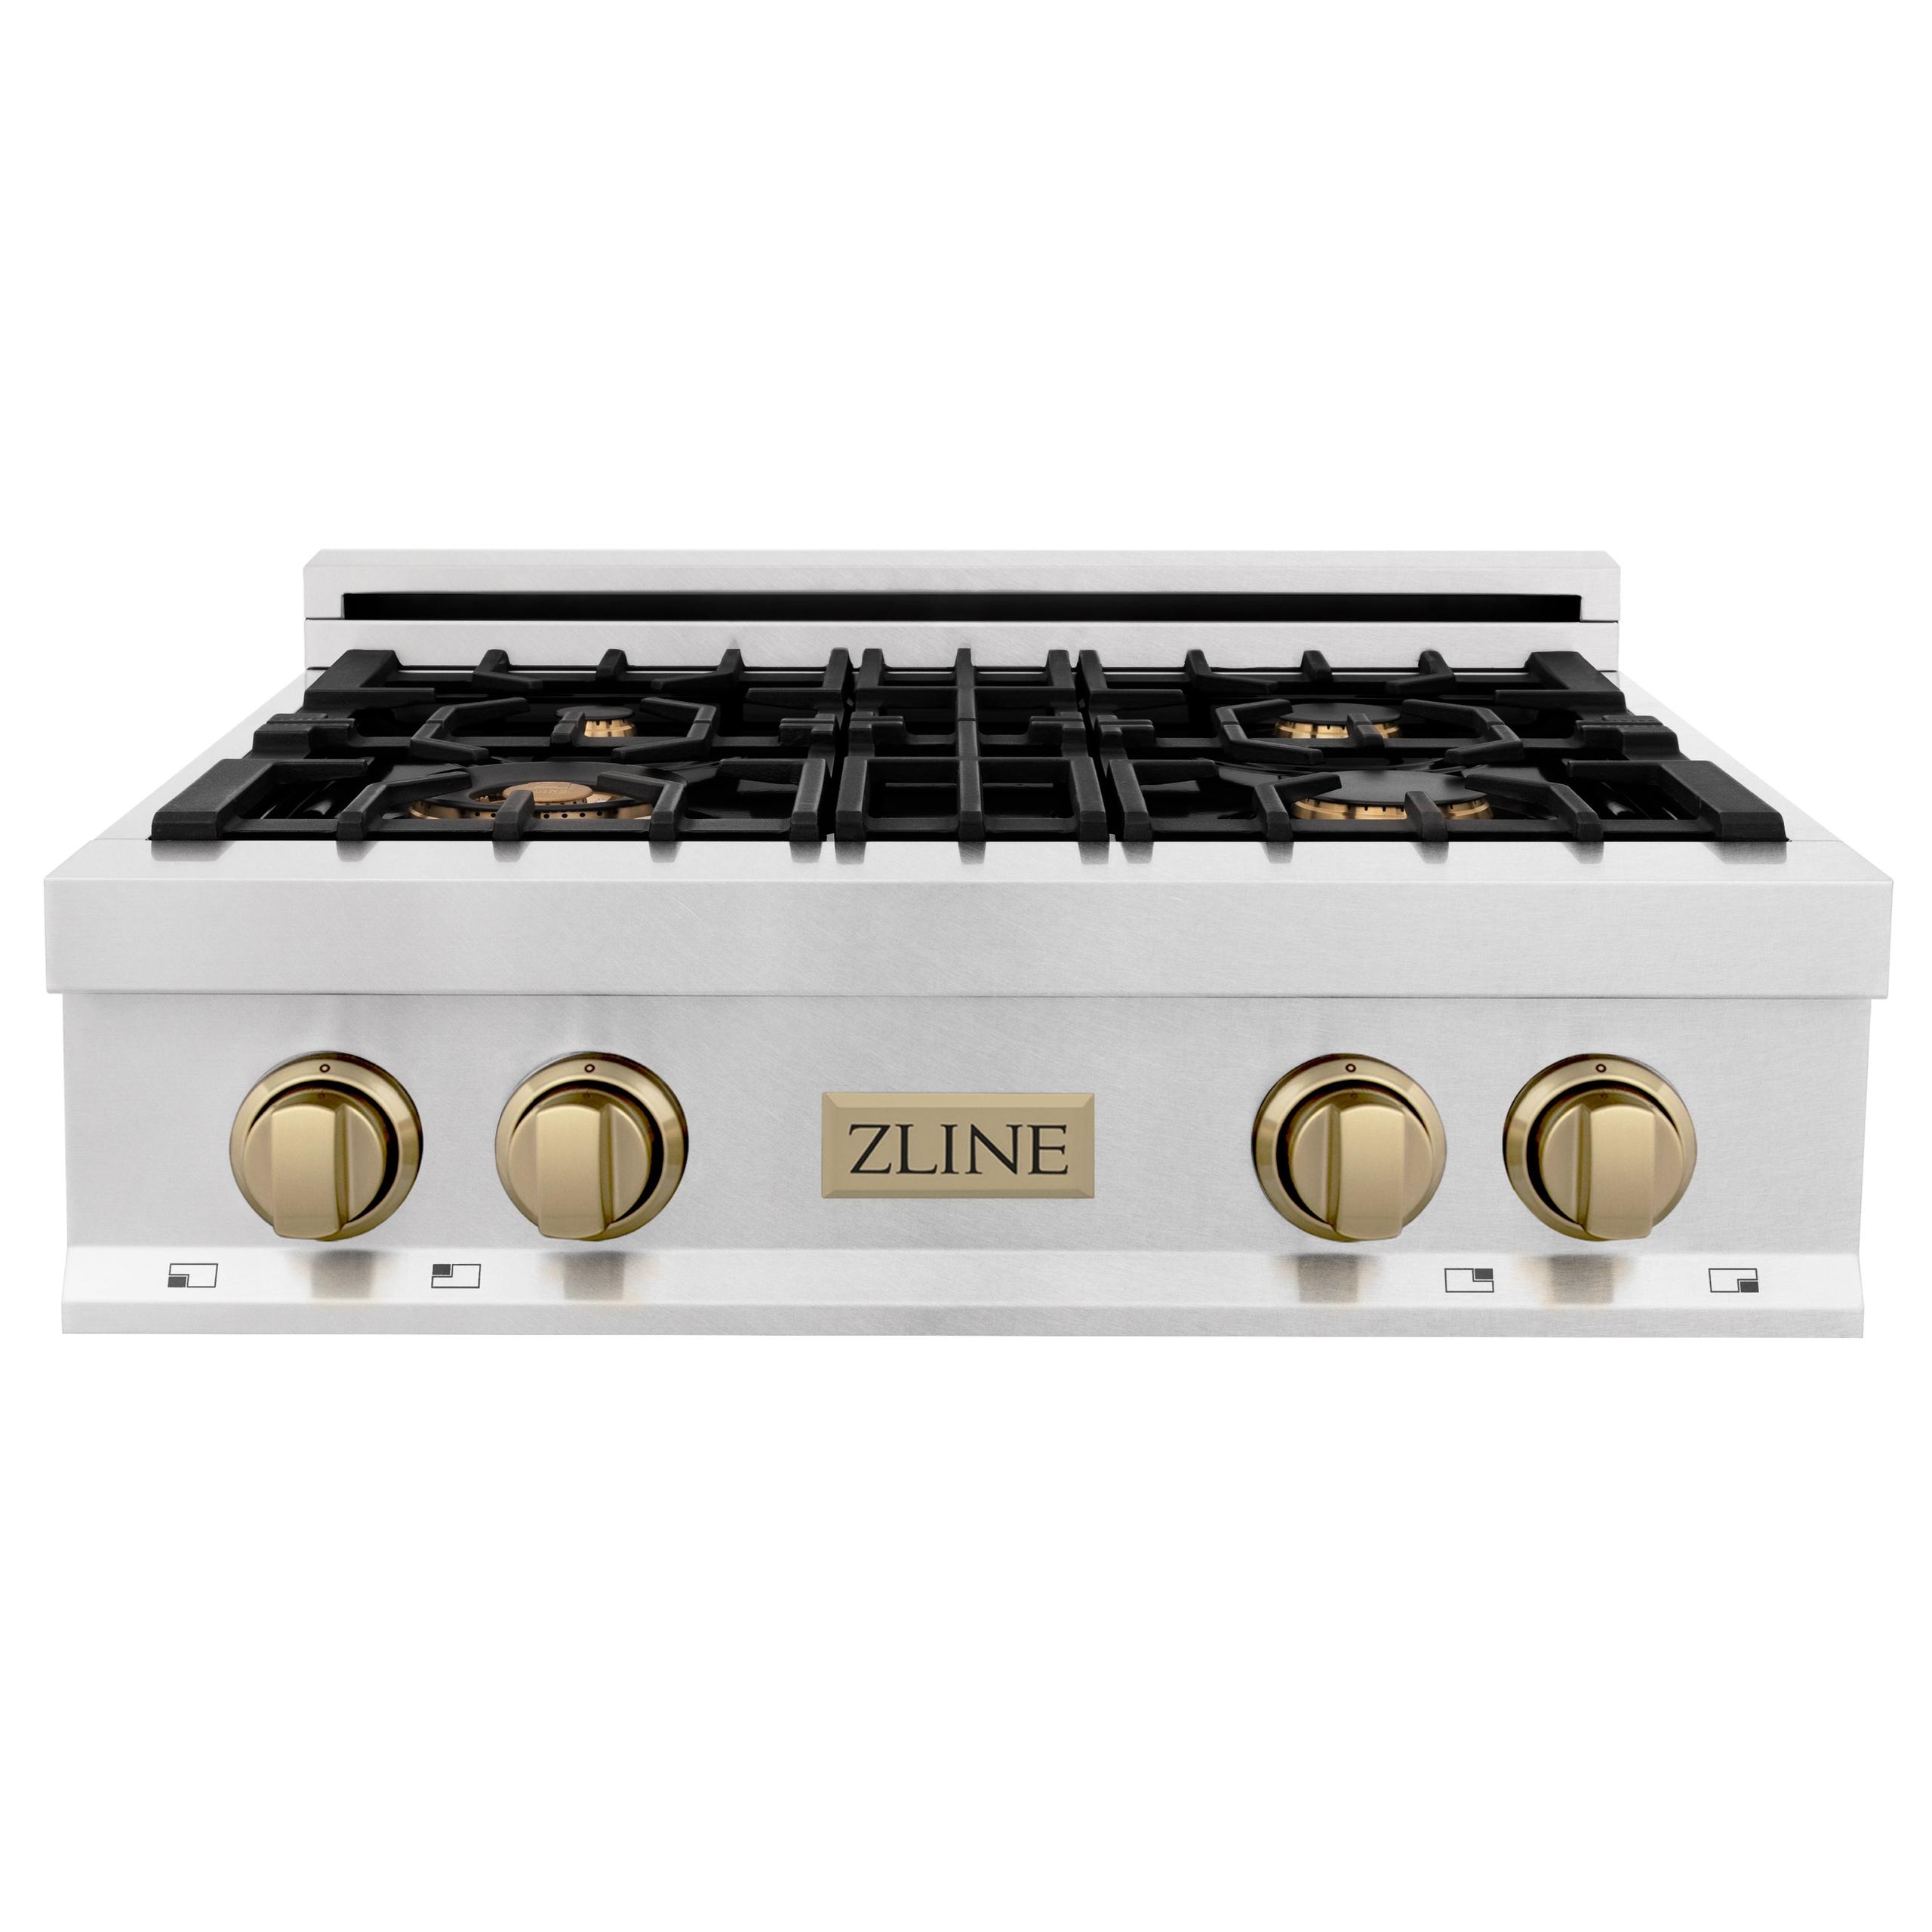 ZLINE KITCHEN AND BATH RTSZ30CB ZLINE Autograph Edition 30" Porcelain Rangetop with 4 Gas Burners in DuraSnow R Stainless Steel and Accents Color: Champagne Bronze